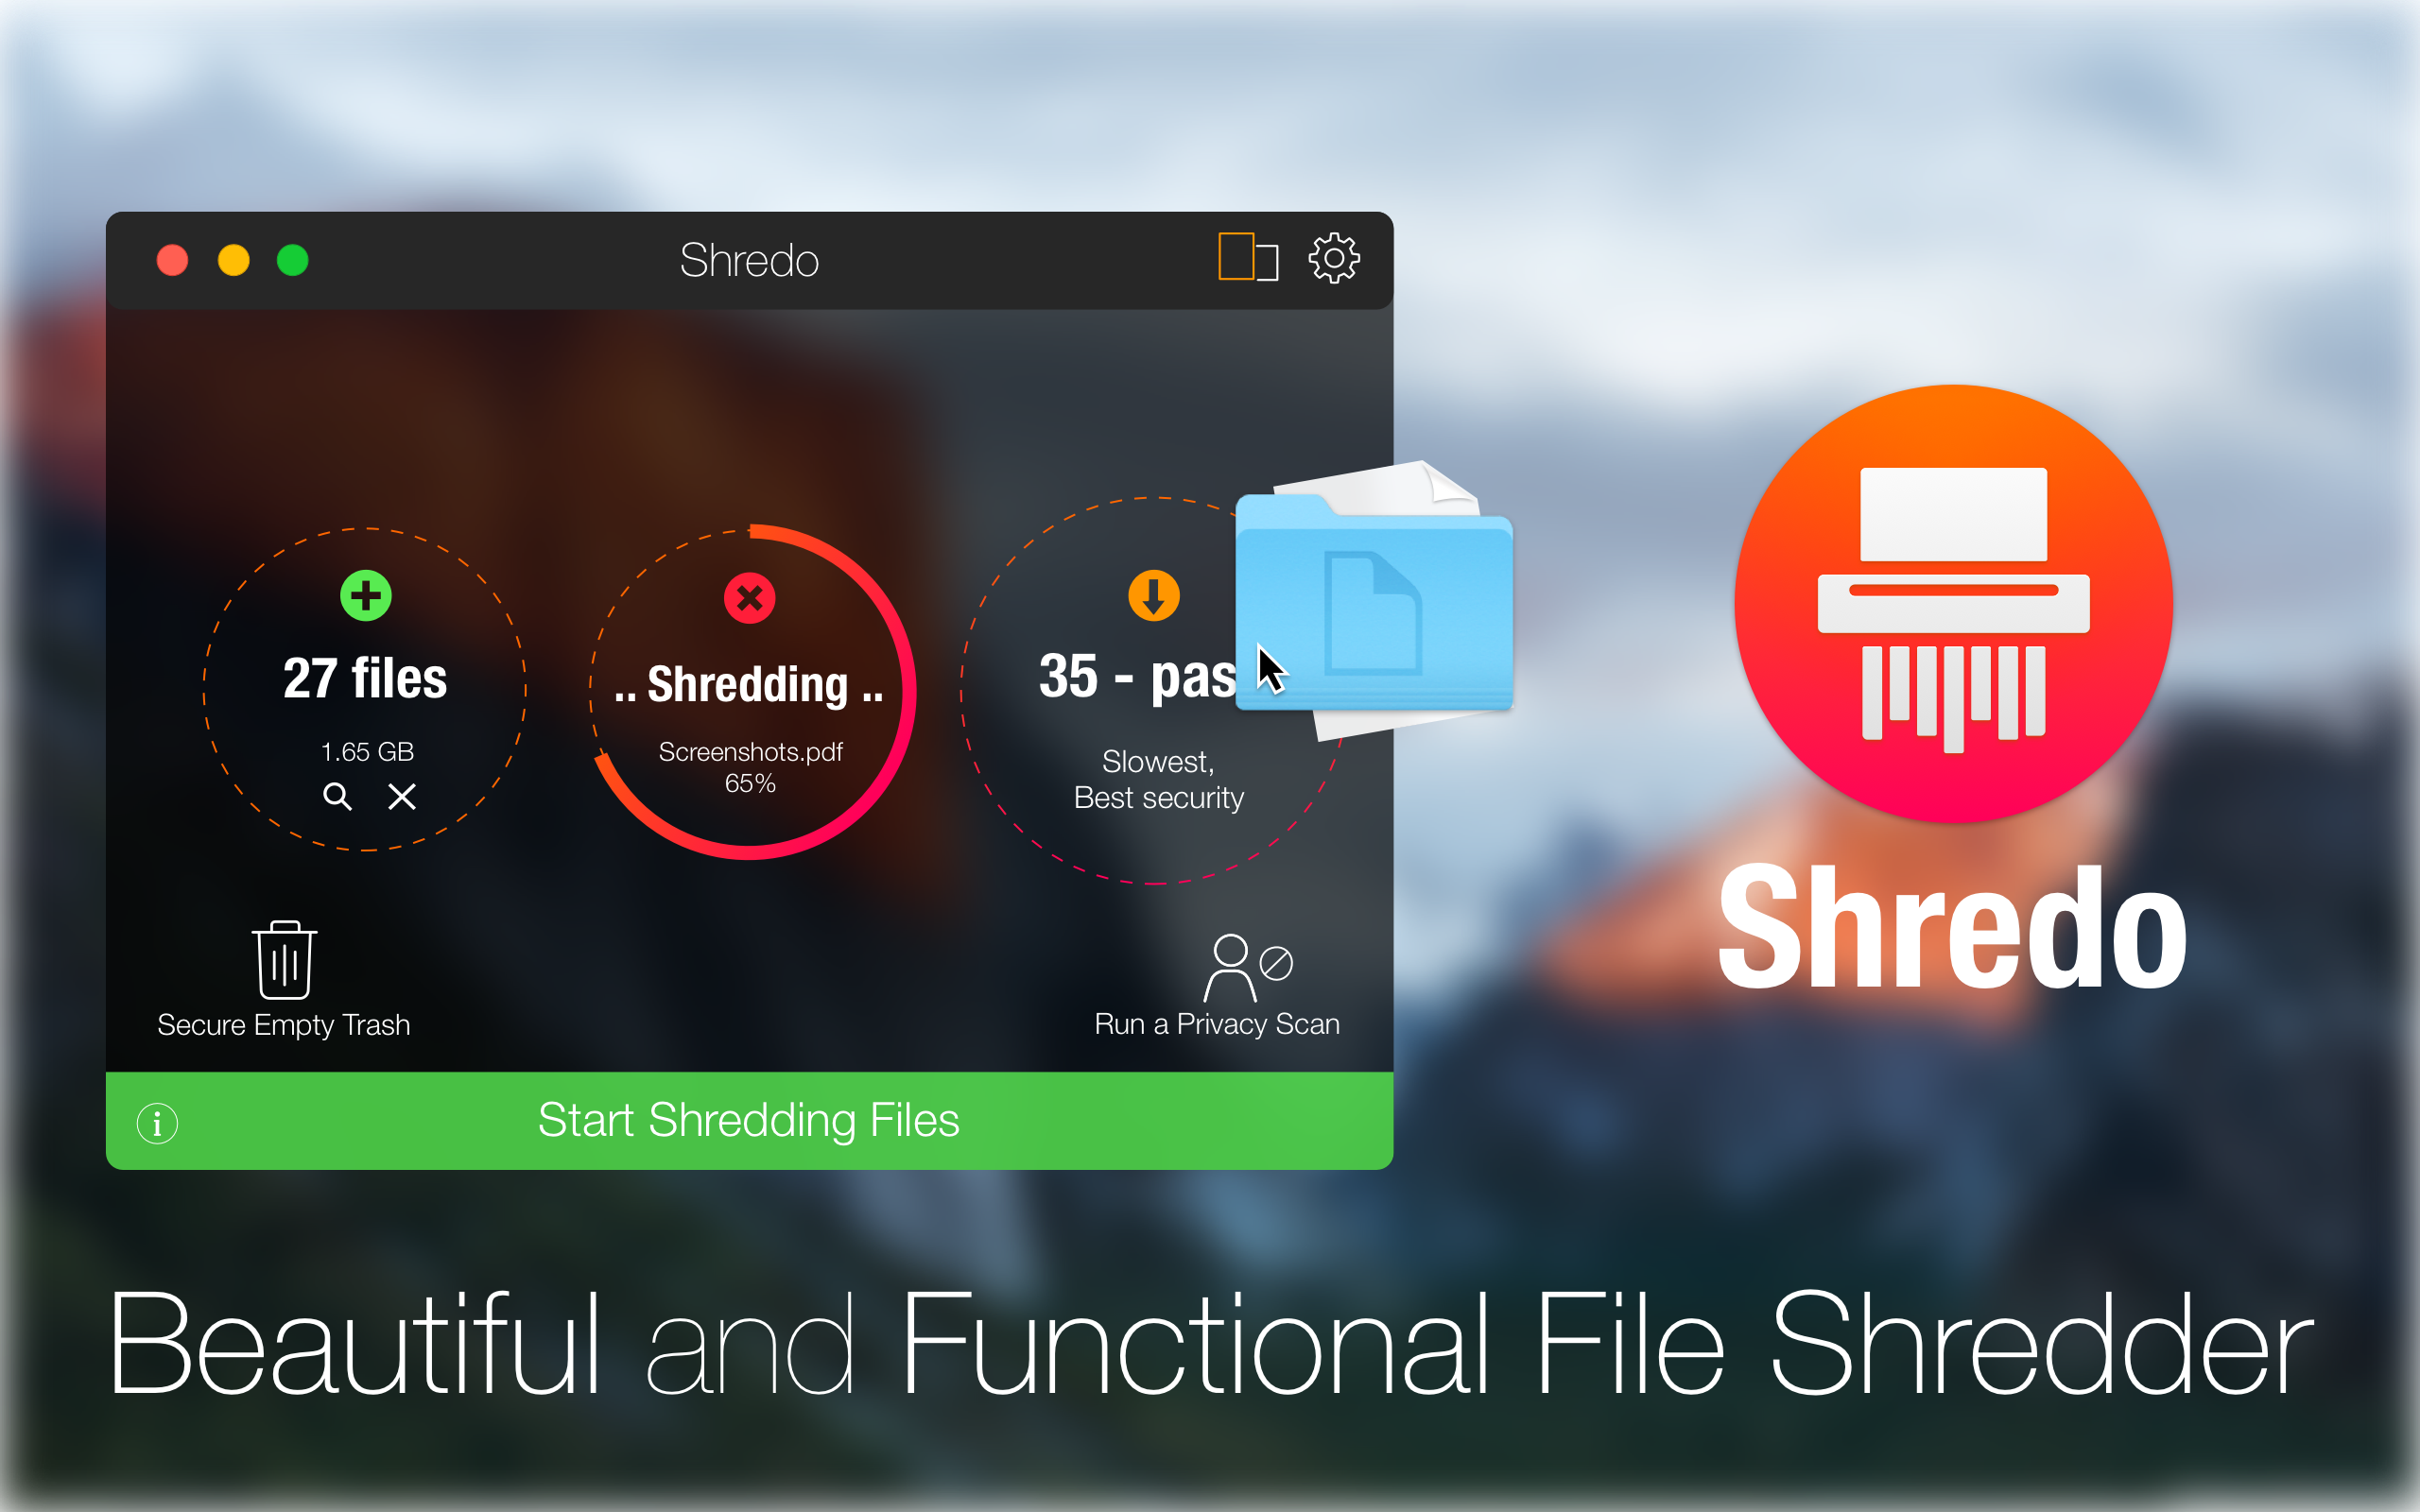 Shredo 1.2 : UI and features